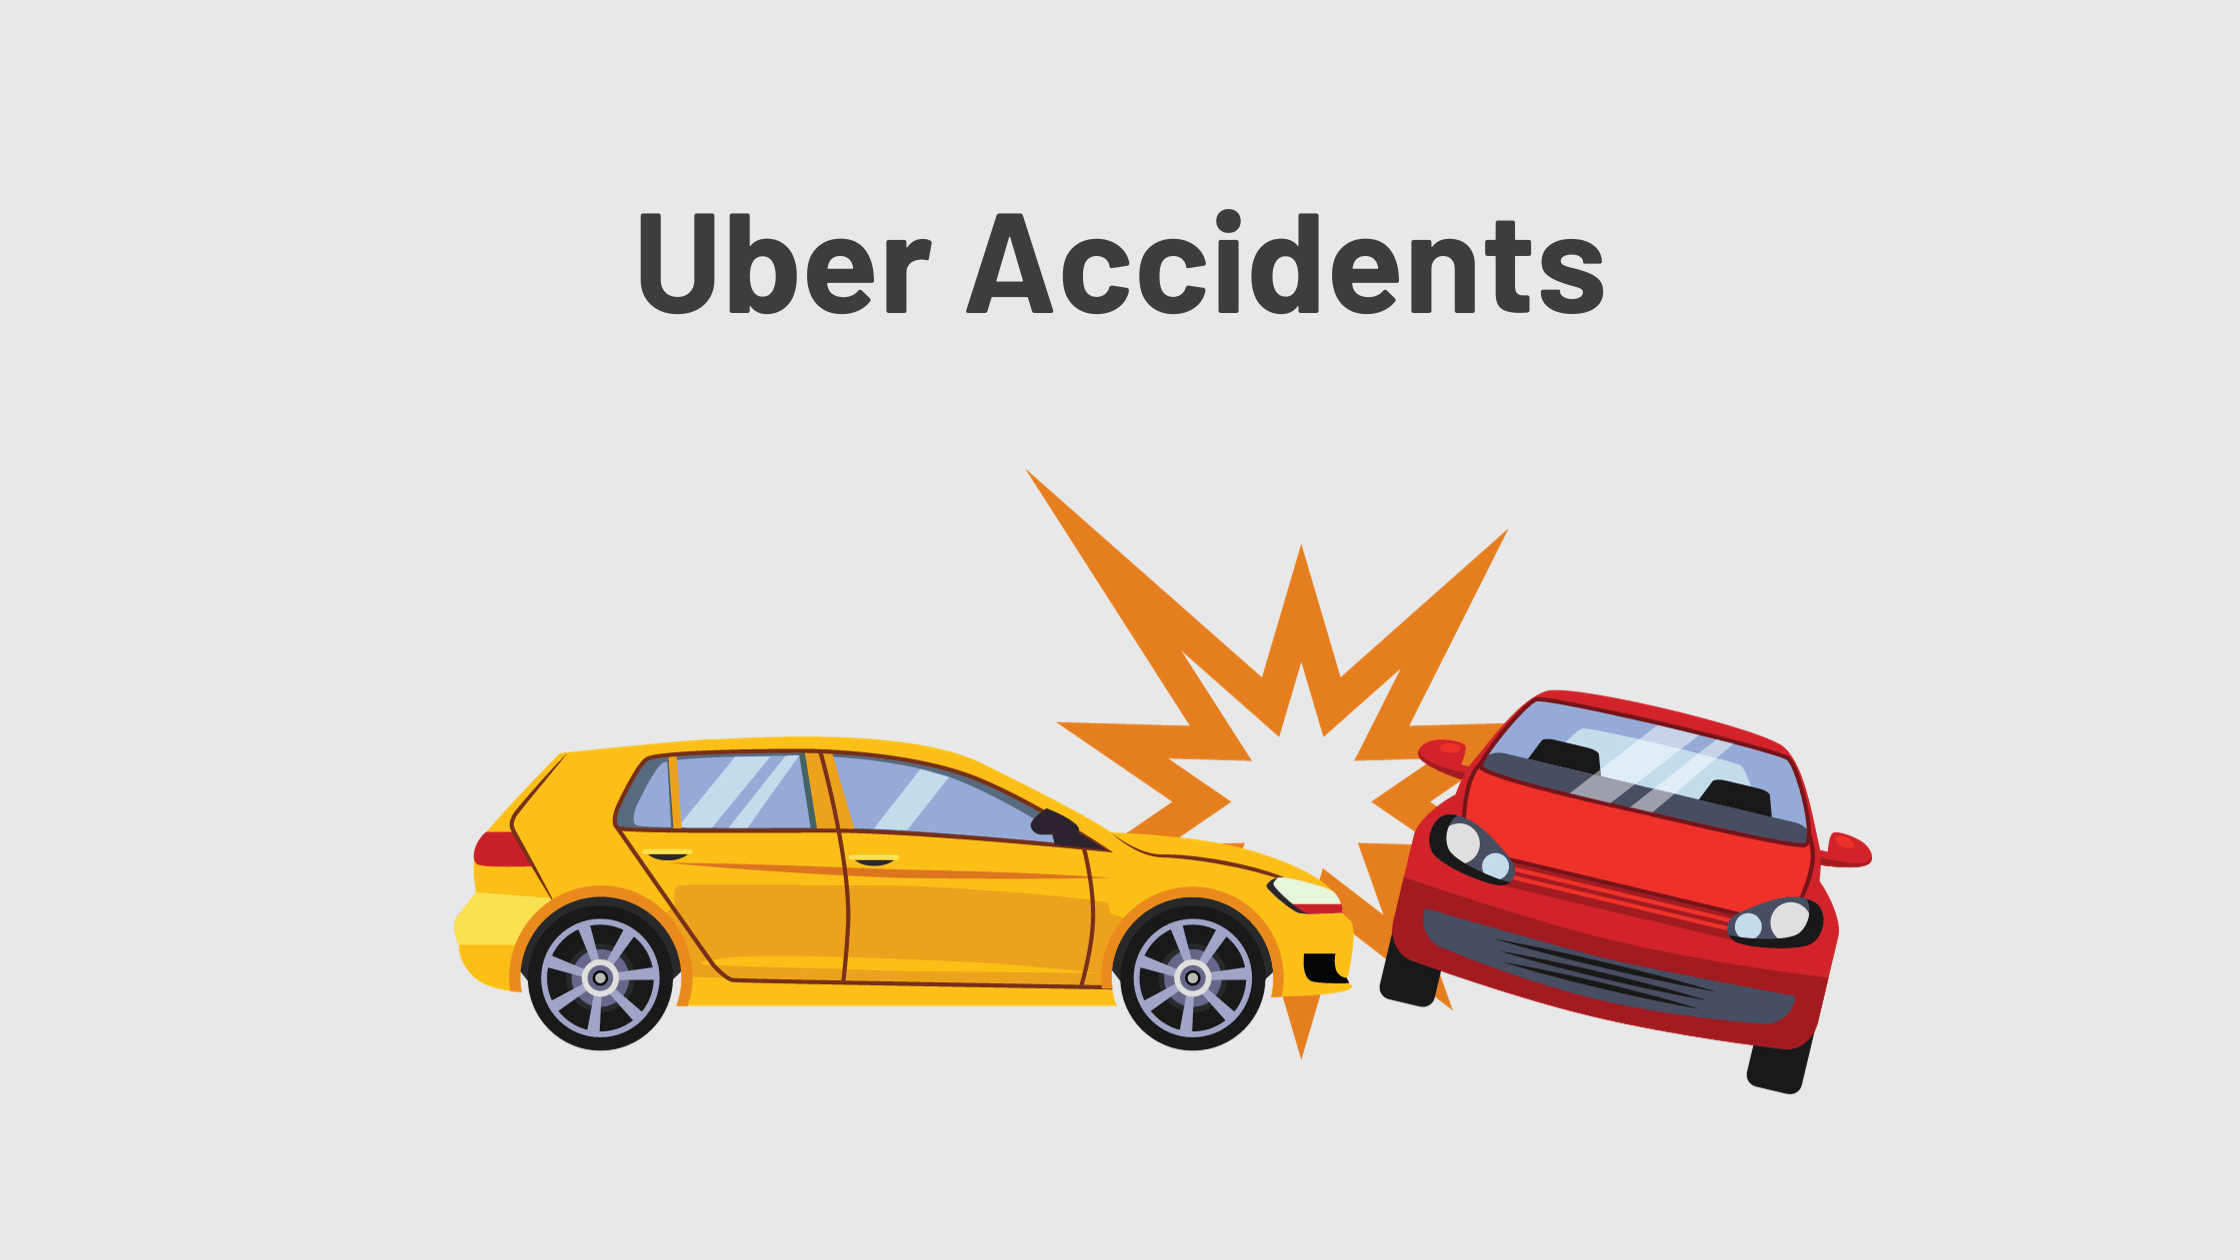 Importance of Hiring a Personal Injury Lawyer in Florida: Navigating Uber Accidents and Car Accidents in Venetian Isles